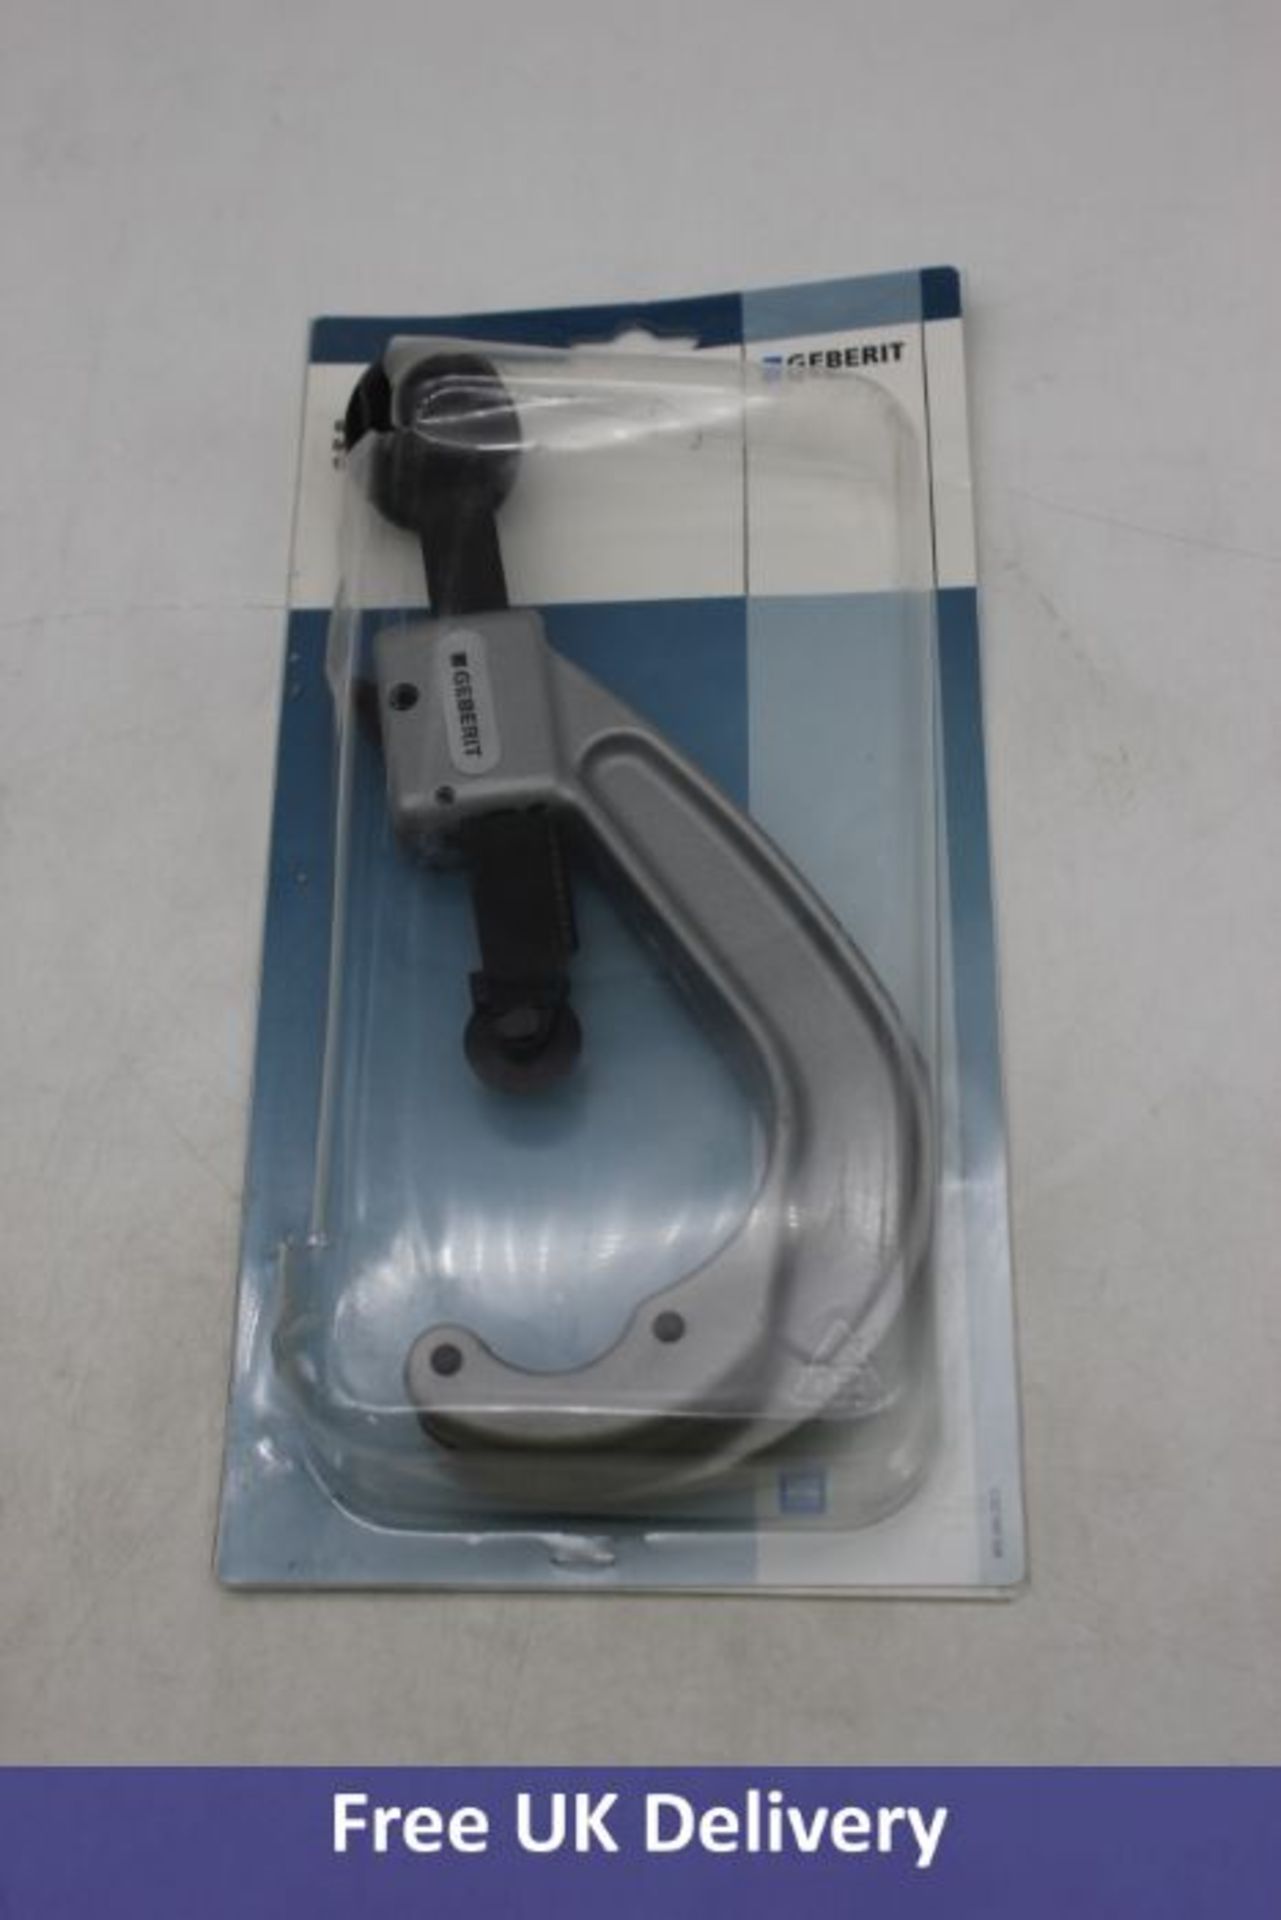 Two Geberit Plumbing Pips Pipe Cutter For Plastic 1x D32-75, 1x D48-116